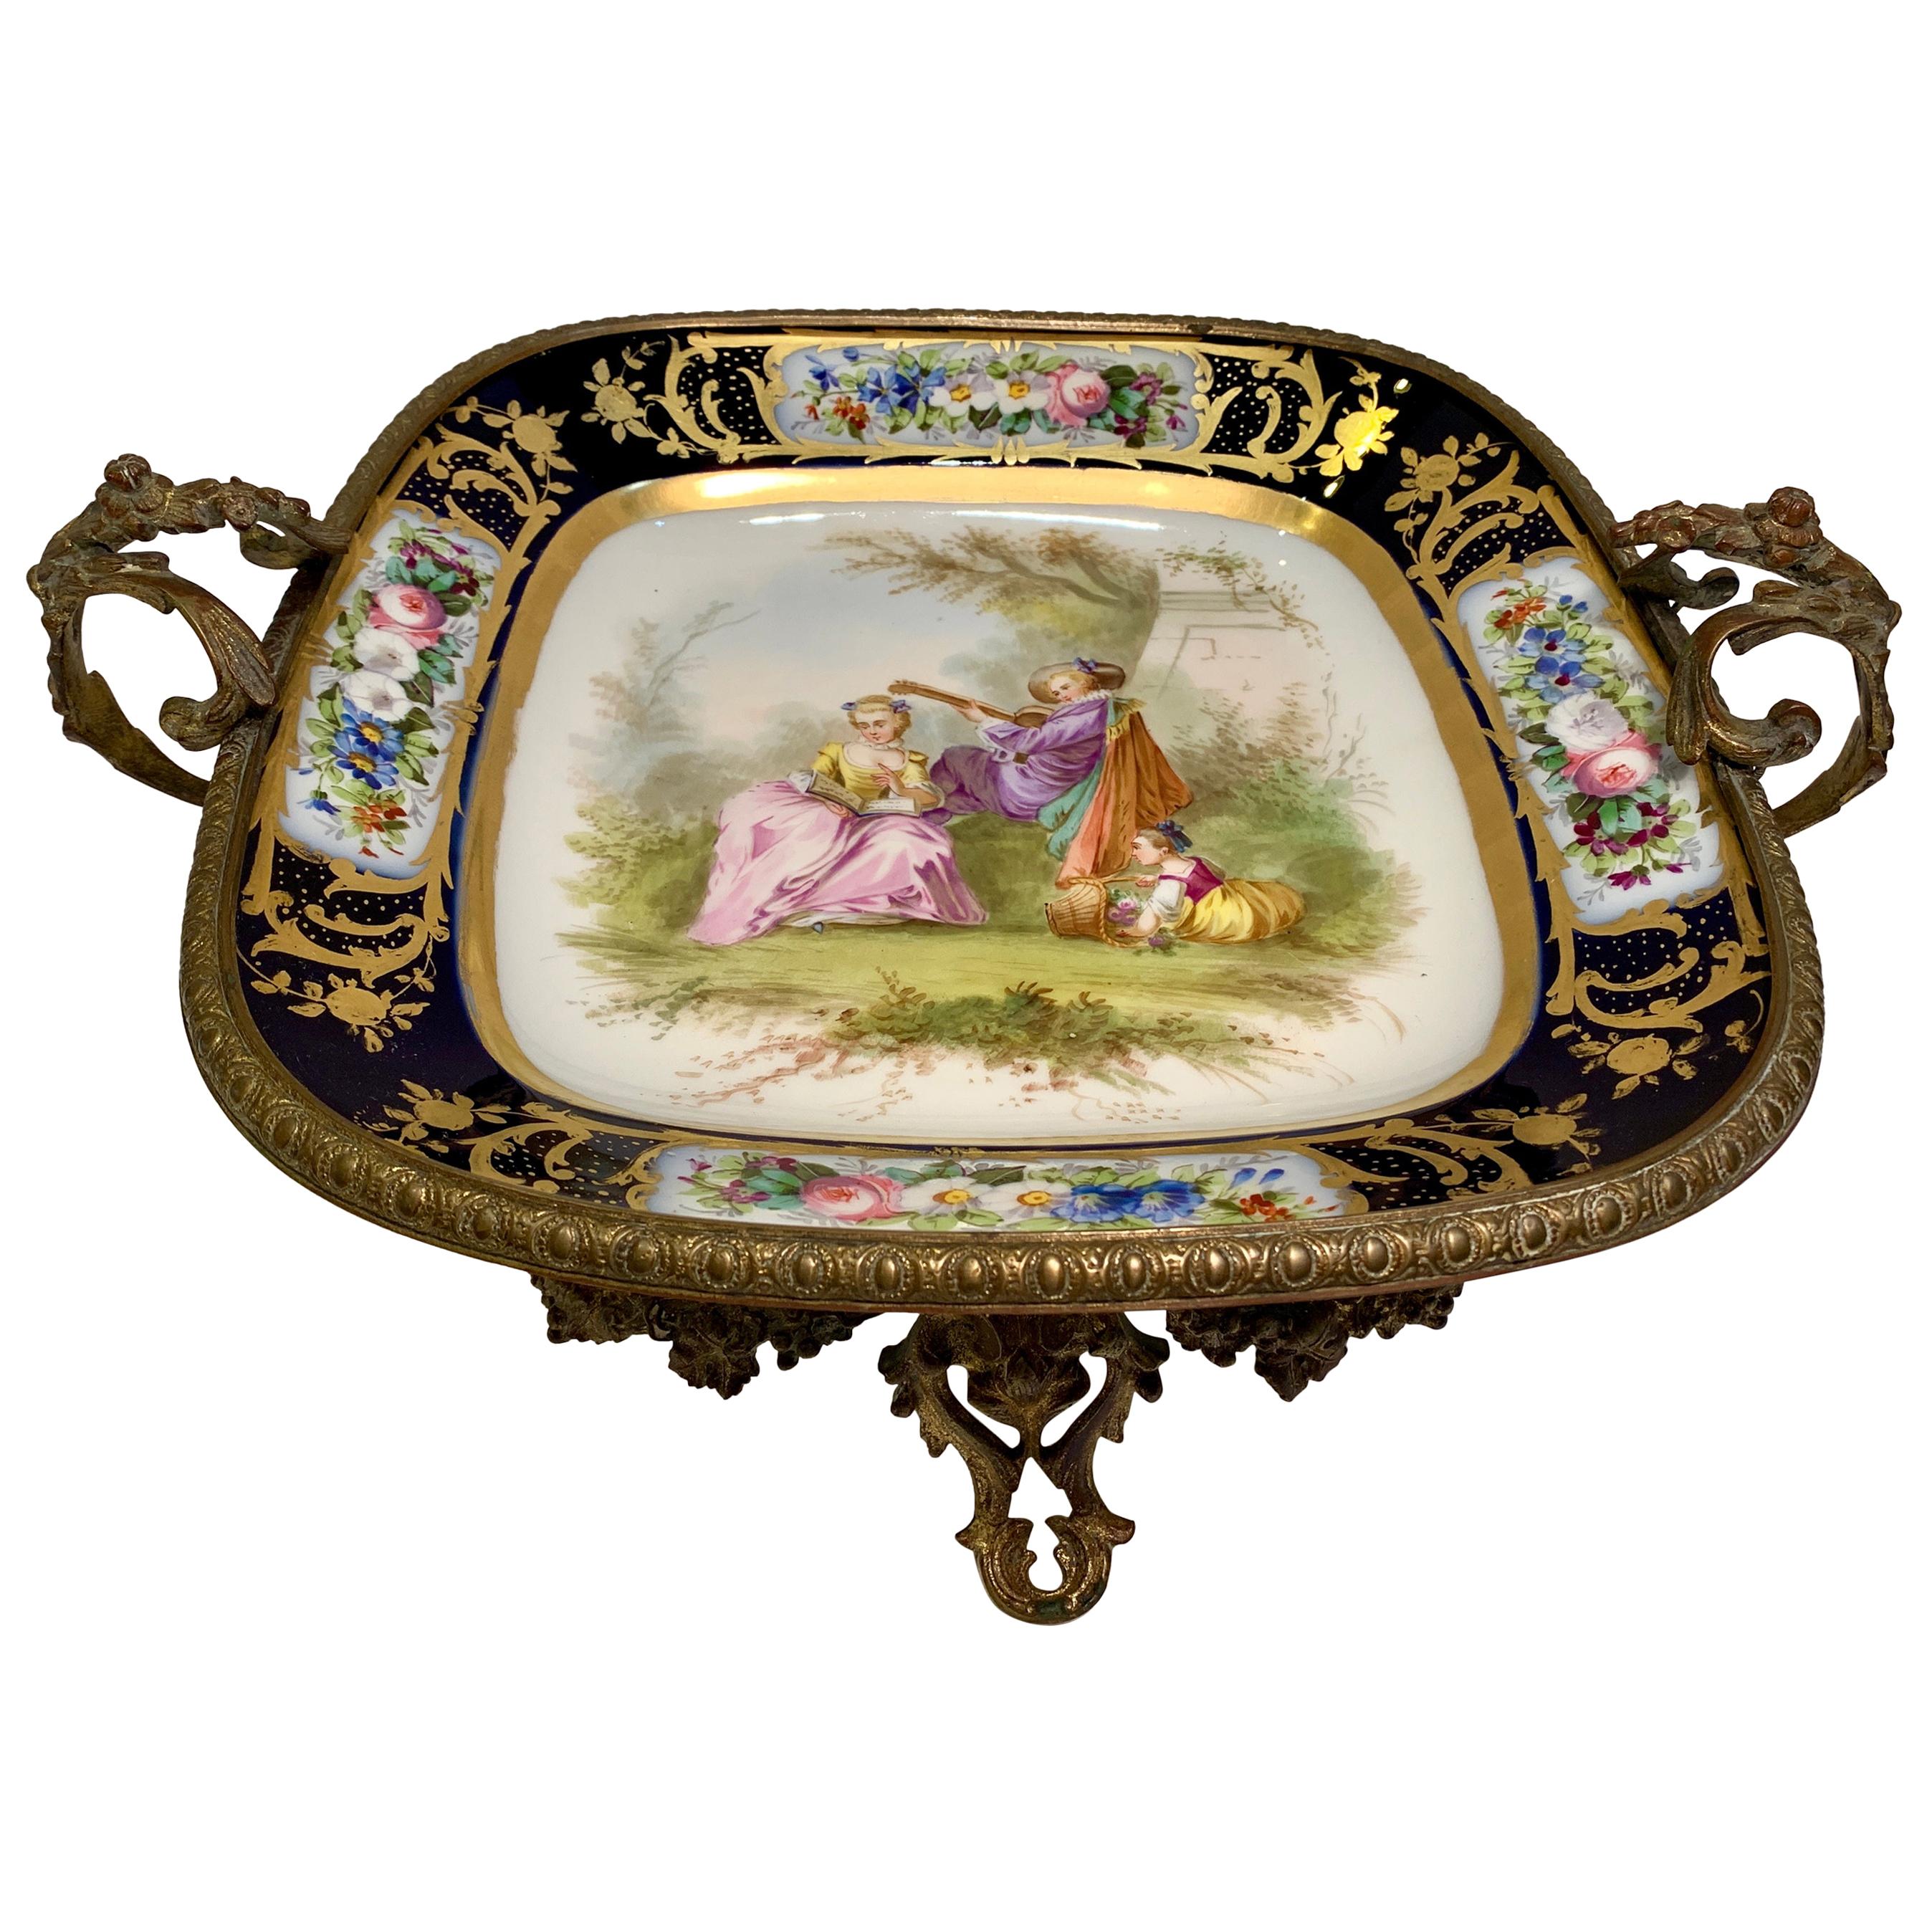 Exquisite Antique French Sevres Cobalt Porcelain and Ormolu Centerpiece Compote For Sale